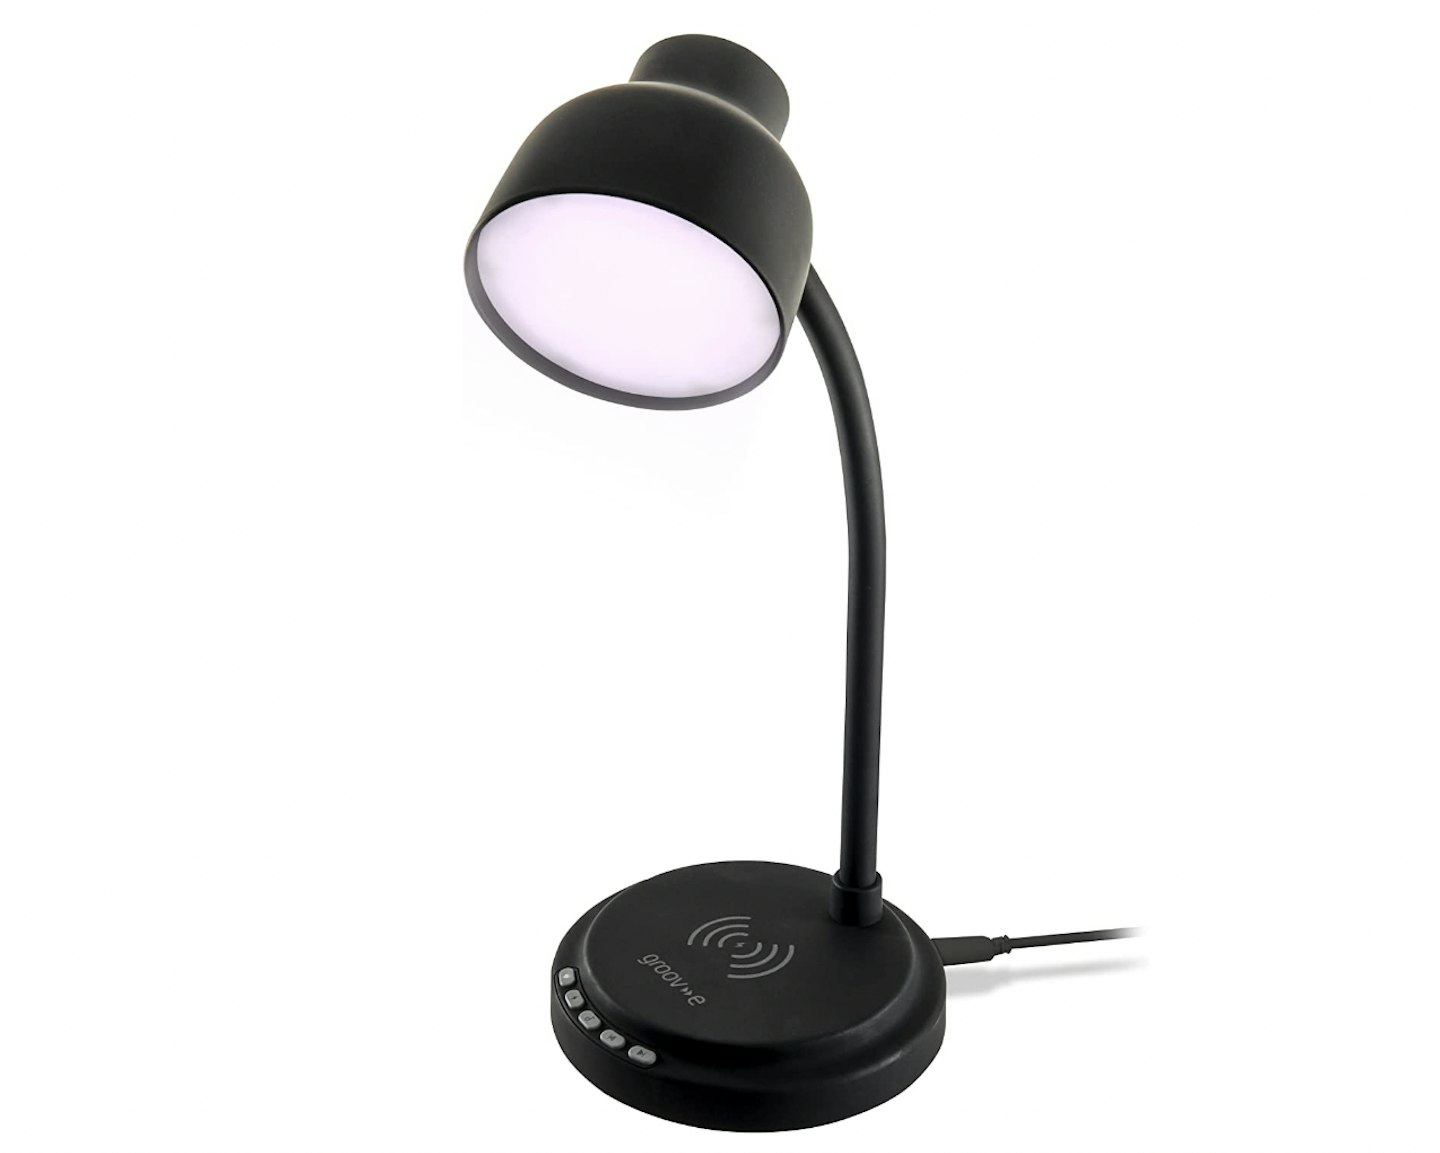  Groov-e Astra Touch Control LED Desk Lamp